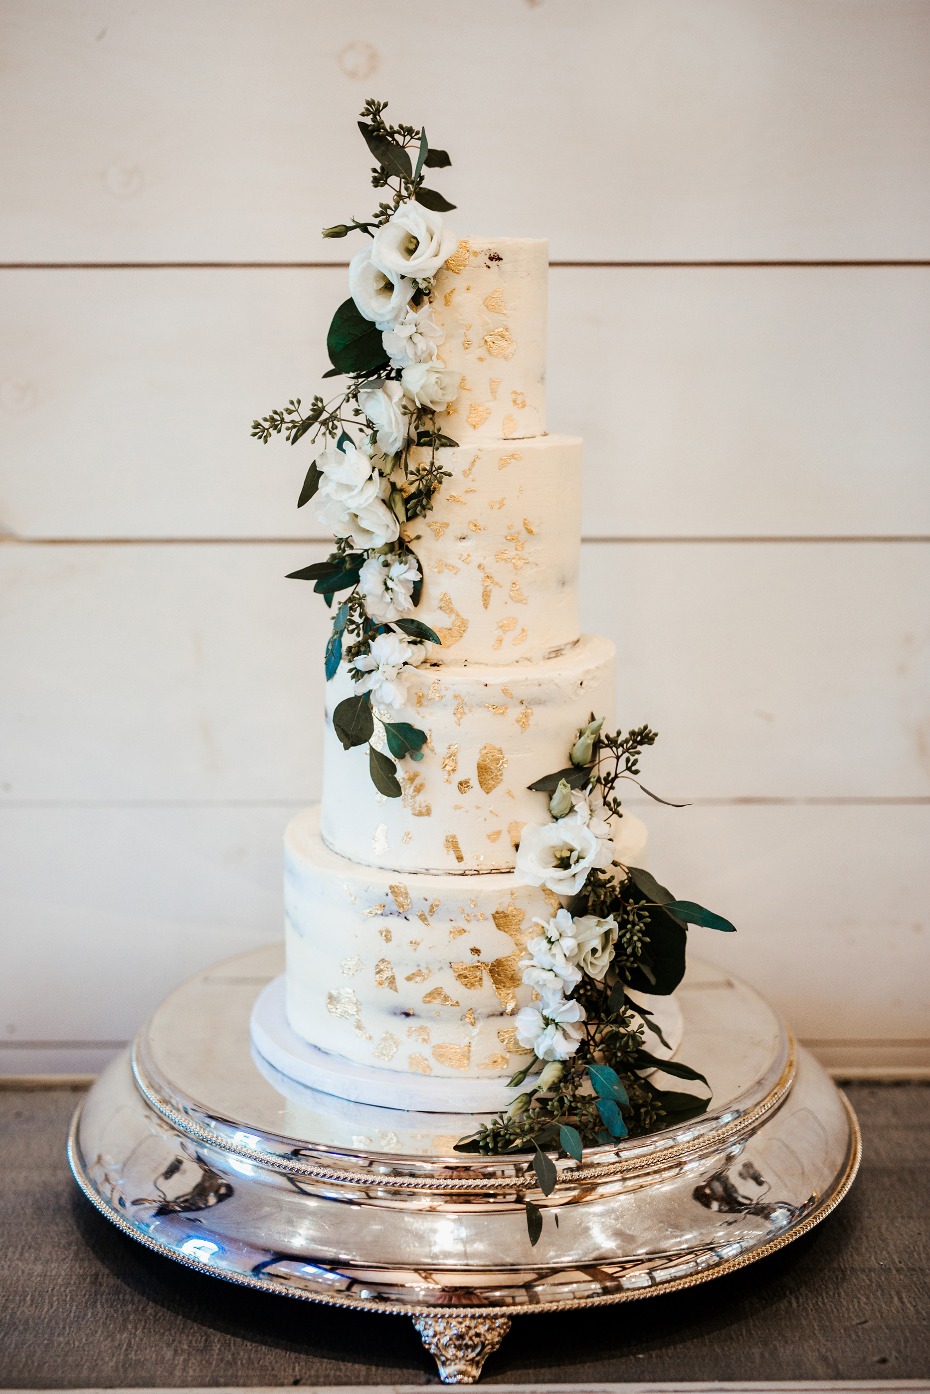 White and gold cake with white flowers